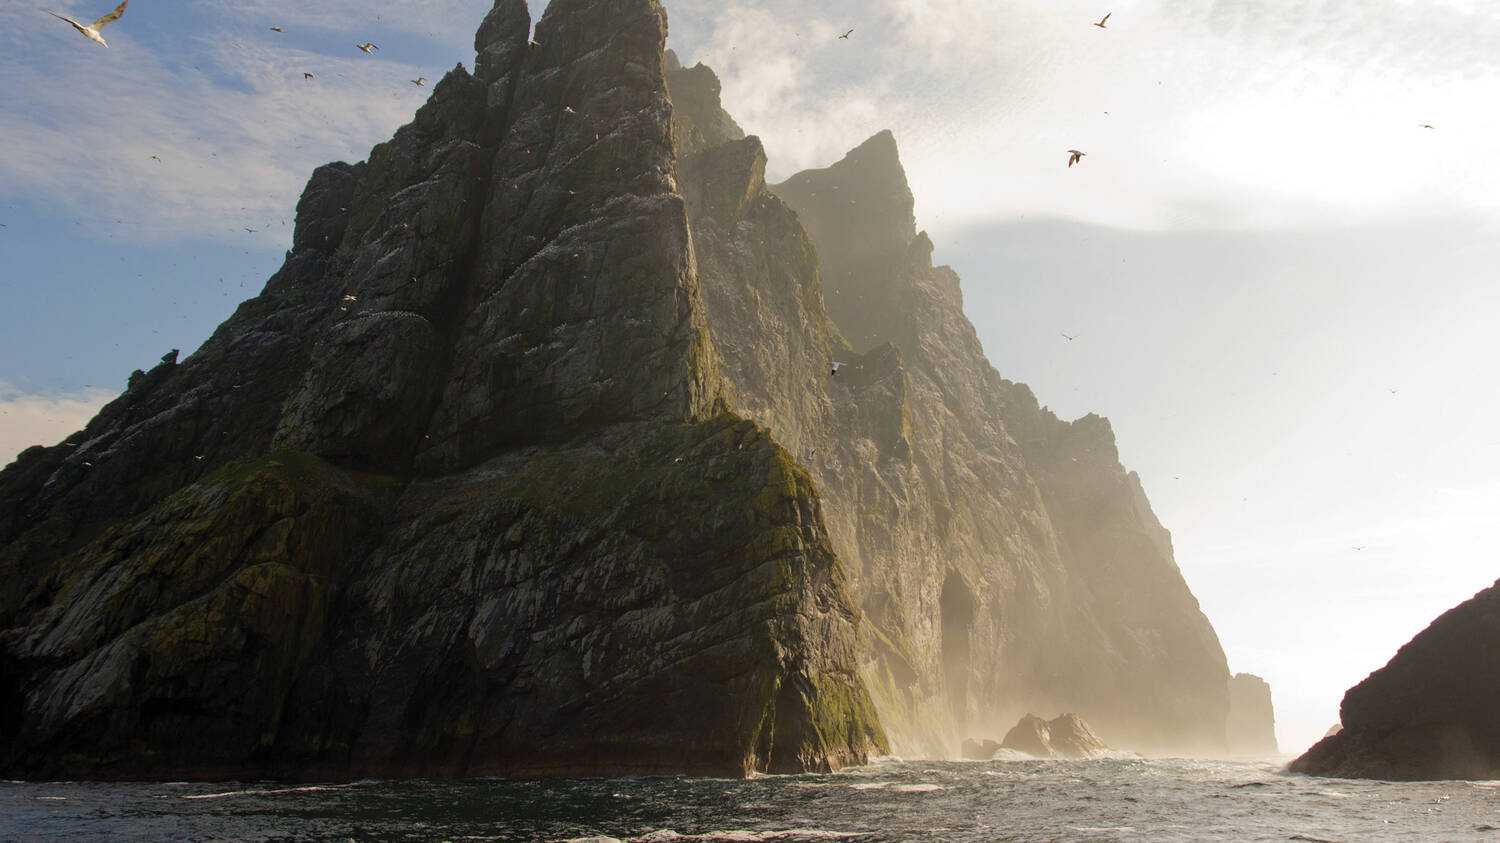 A huge cliff rises from the sea, with gannets swooping in the air.